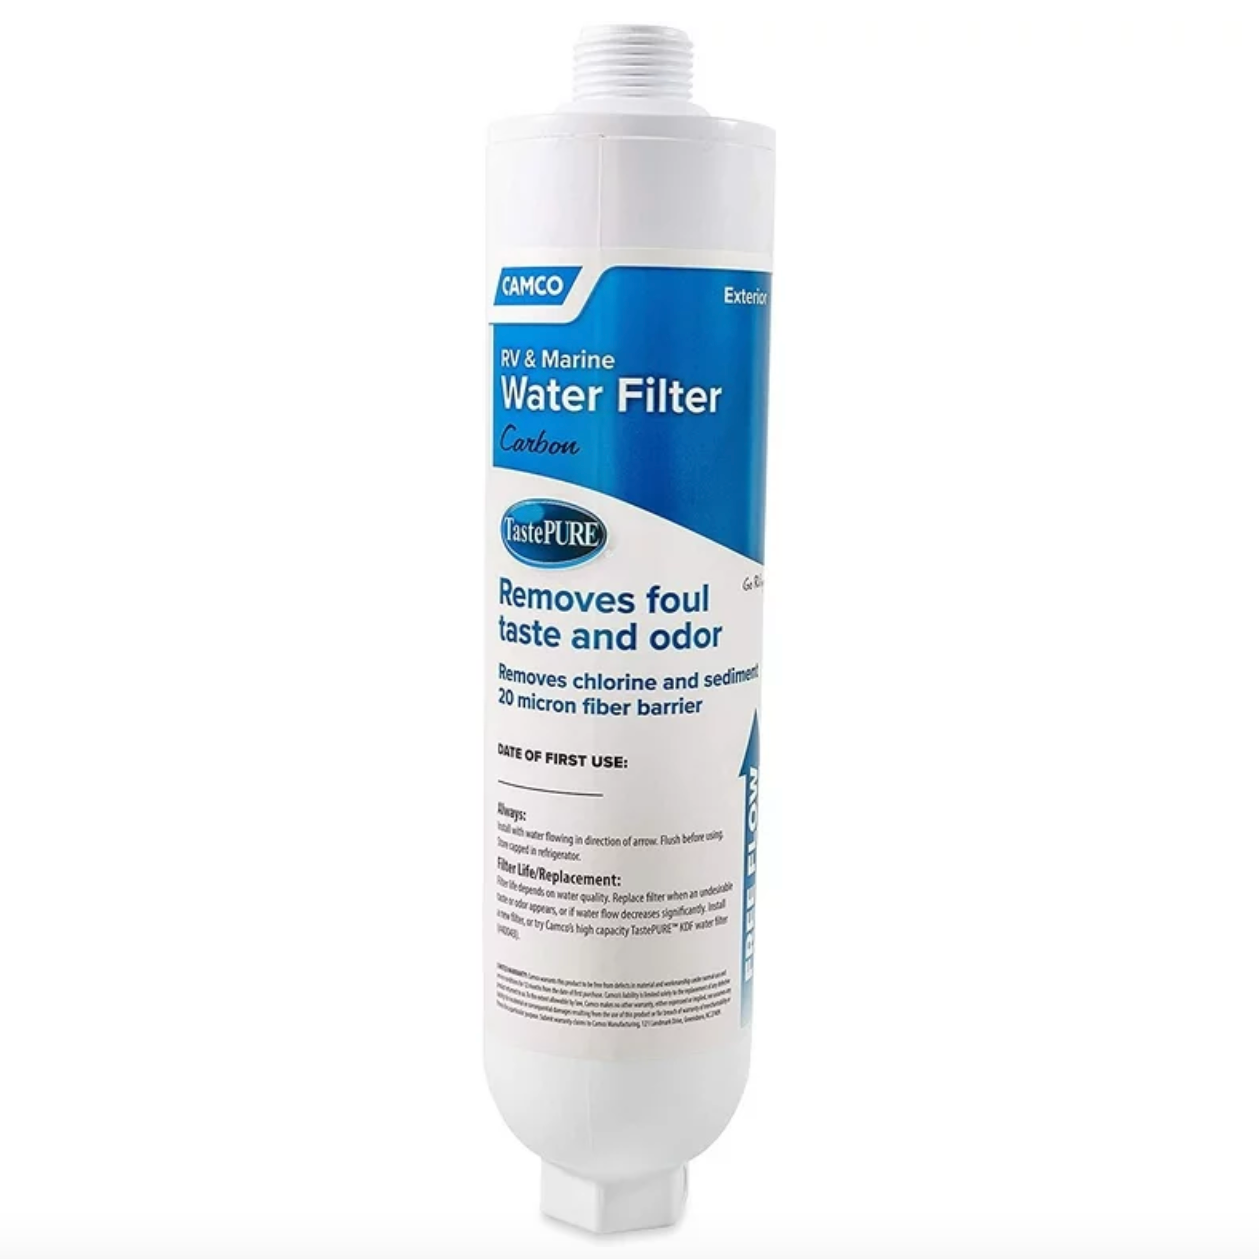 Camco-Taste PURE RV & Marine Water Filter - Filter